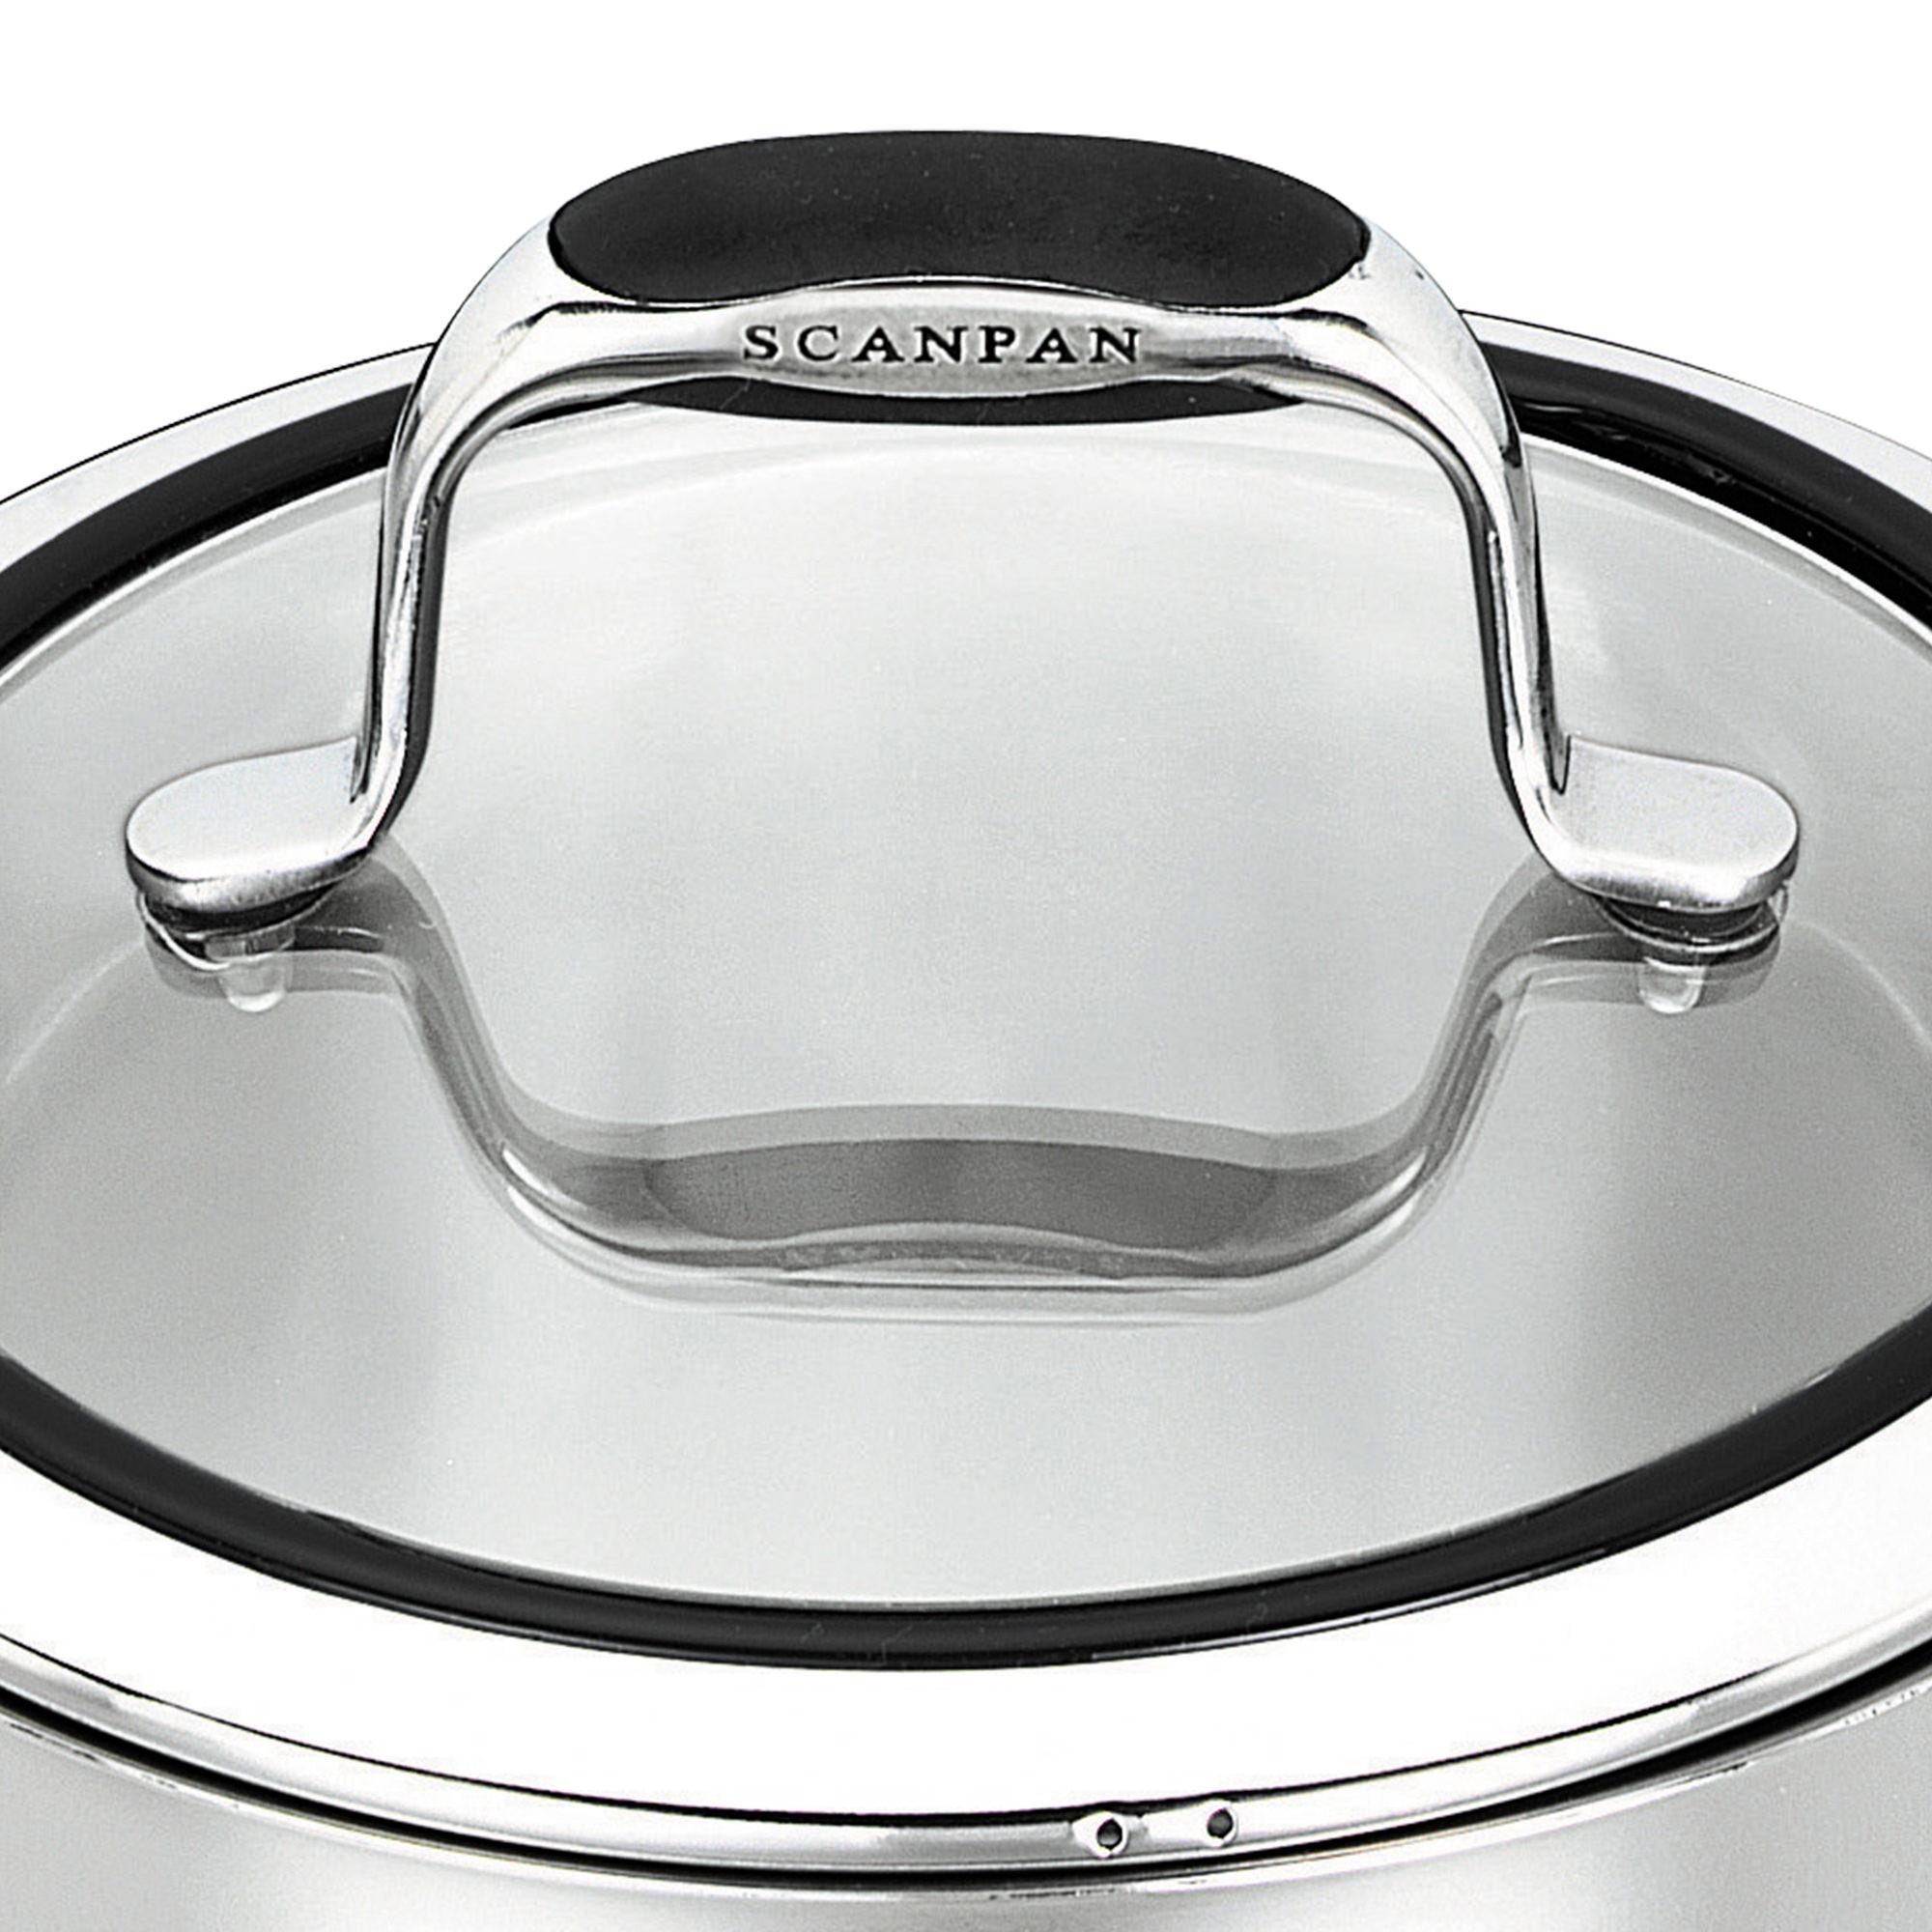 Scanpan Coppernox Stainless Steel Covered Saucepan 20cm - 3.5L Image 3